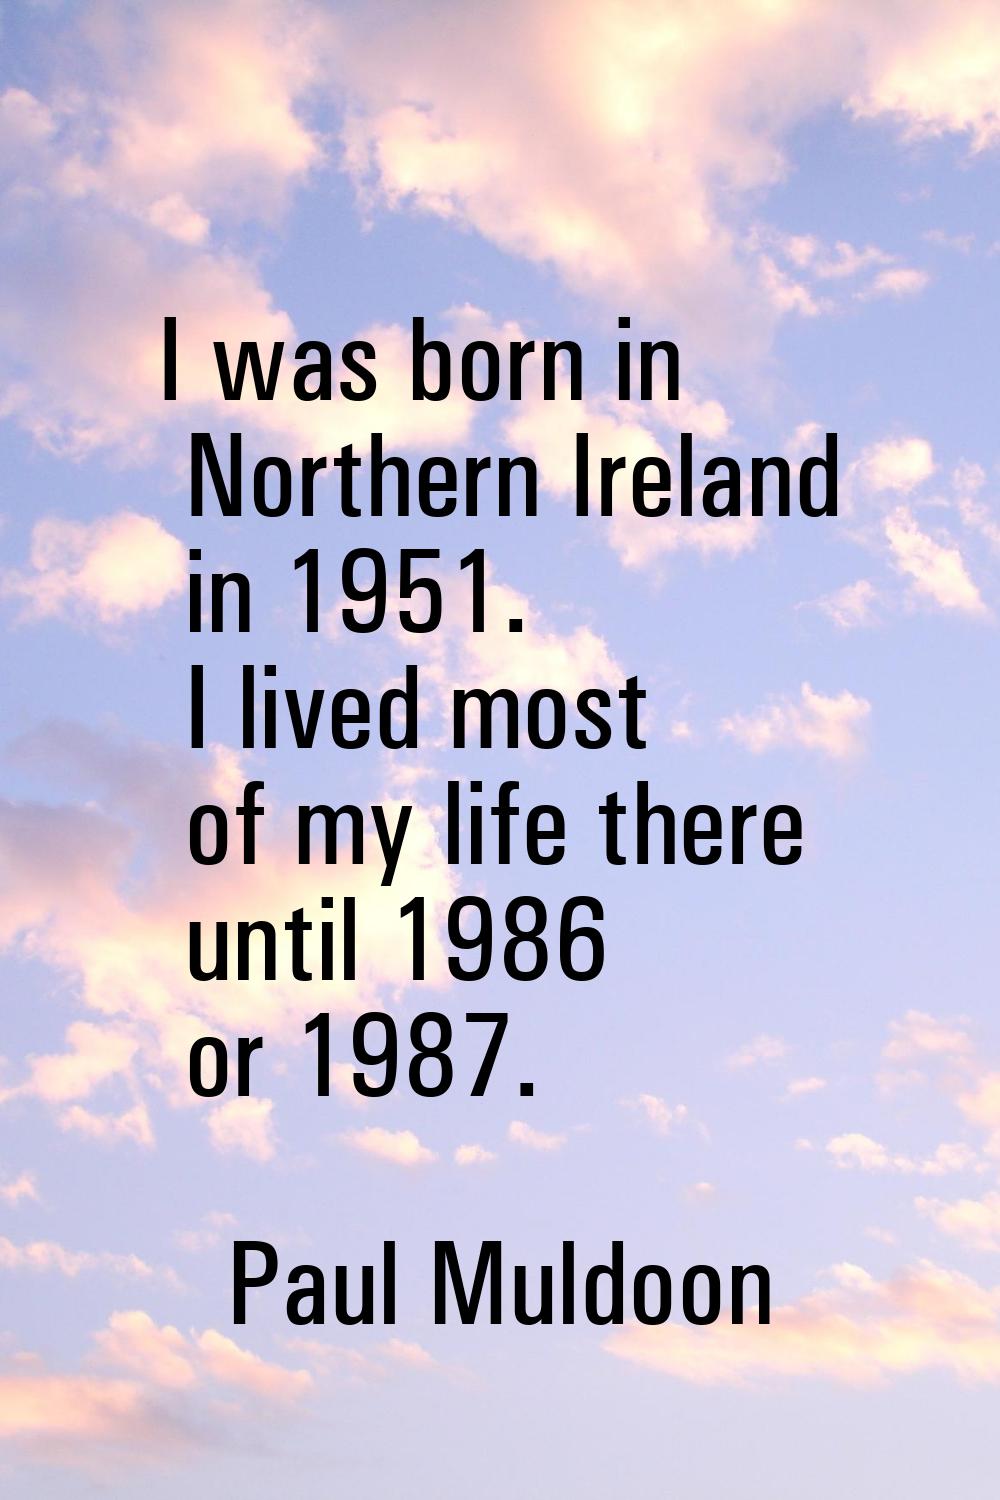 I was born in Northern Ireland in 1951. I lived most of my life there until 1986 or 1987.